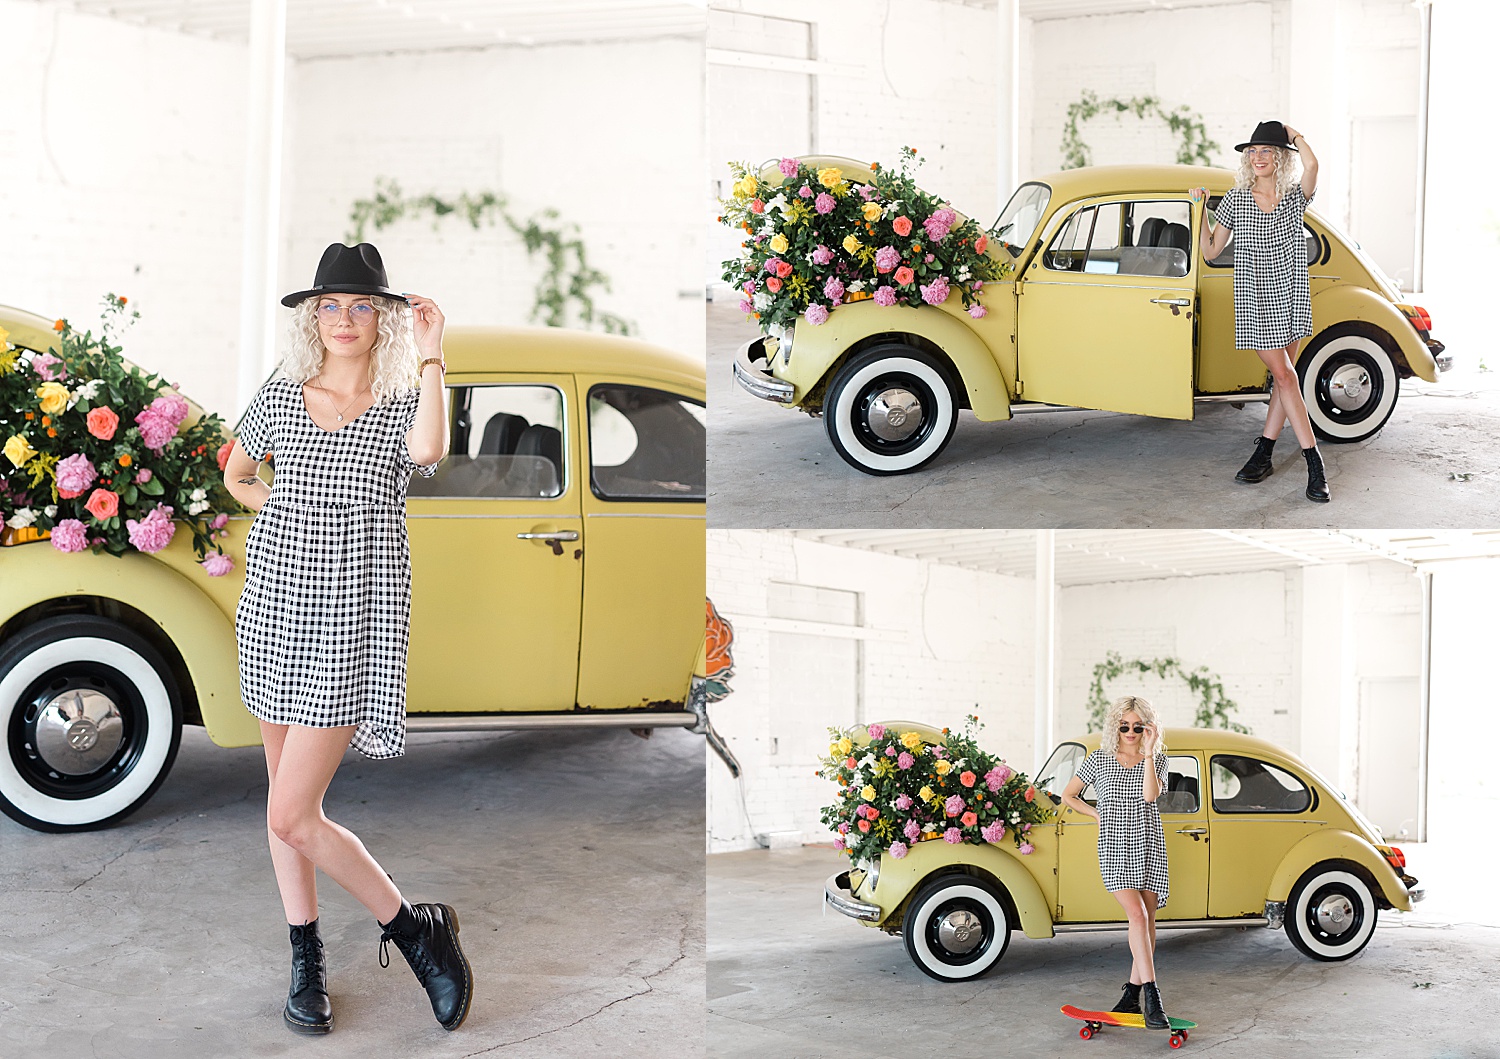 woman in checkered dress in front of car with flowers in it 